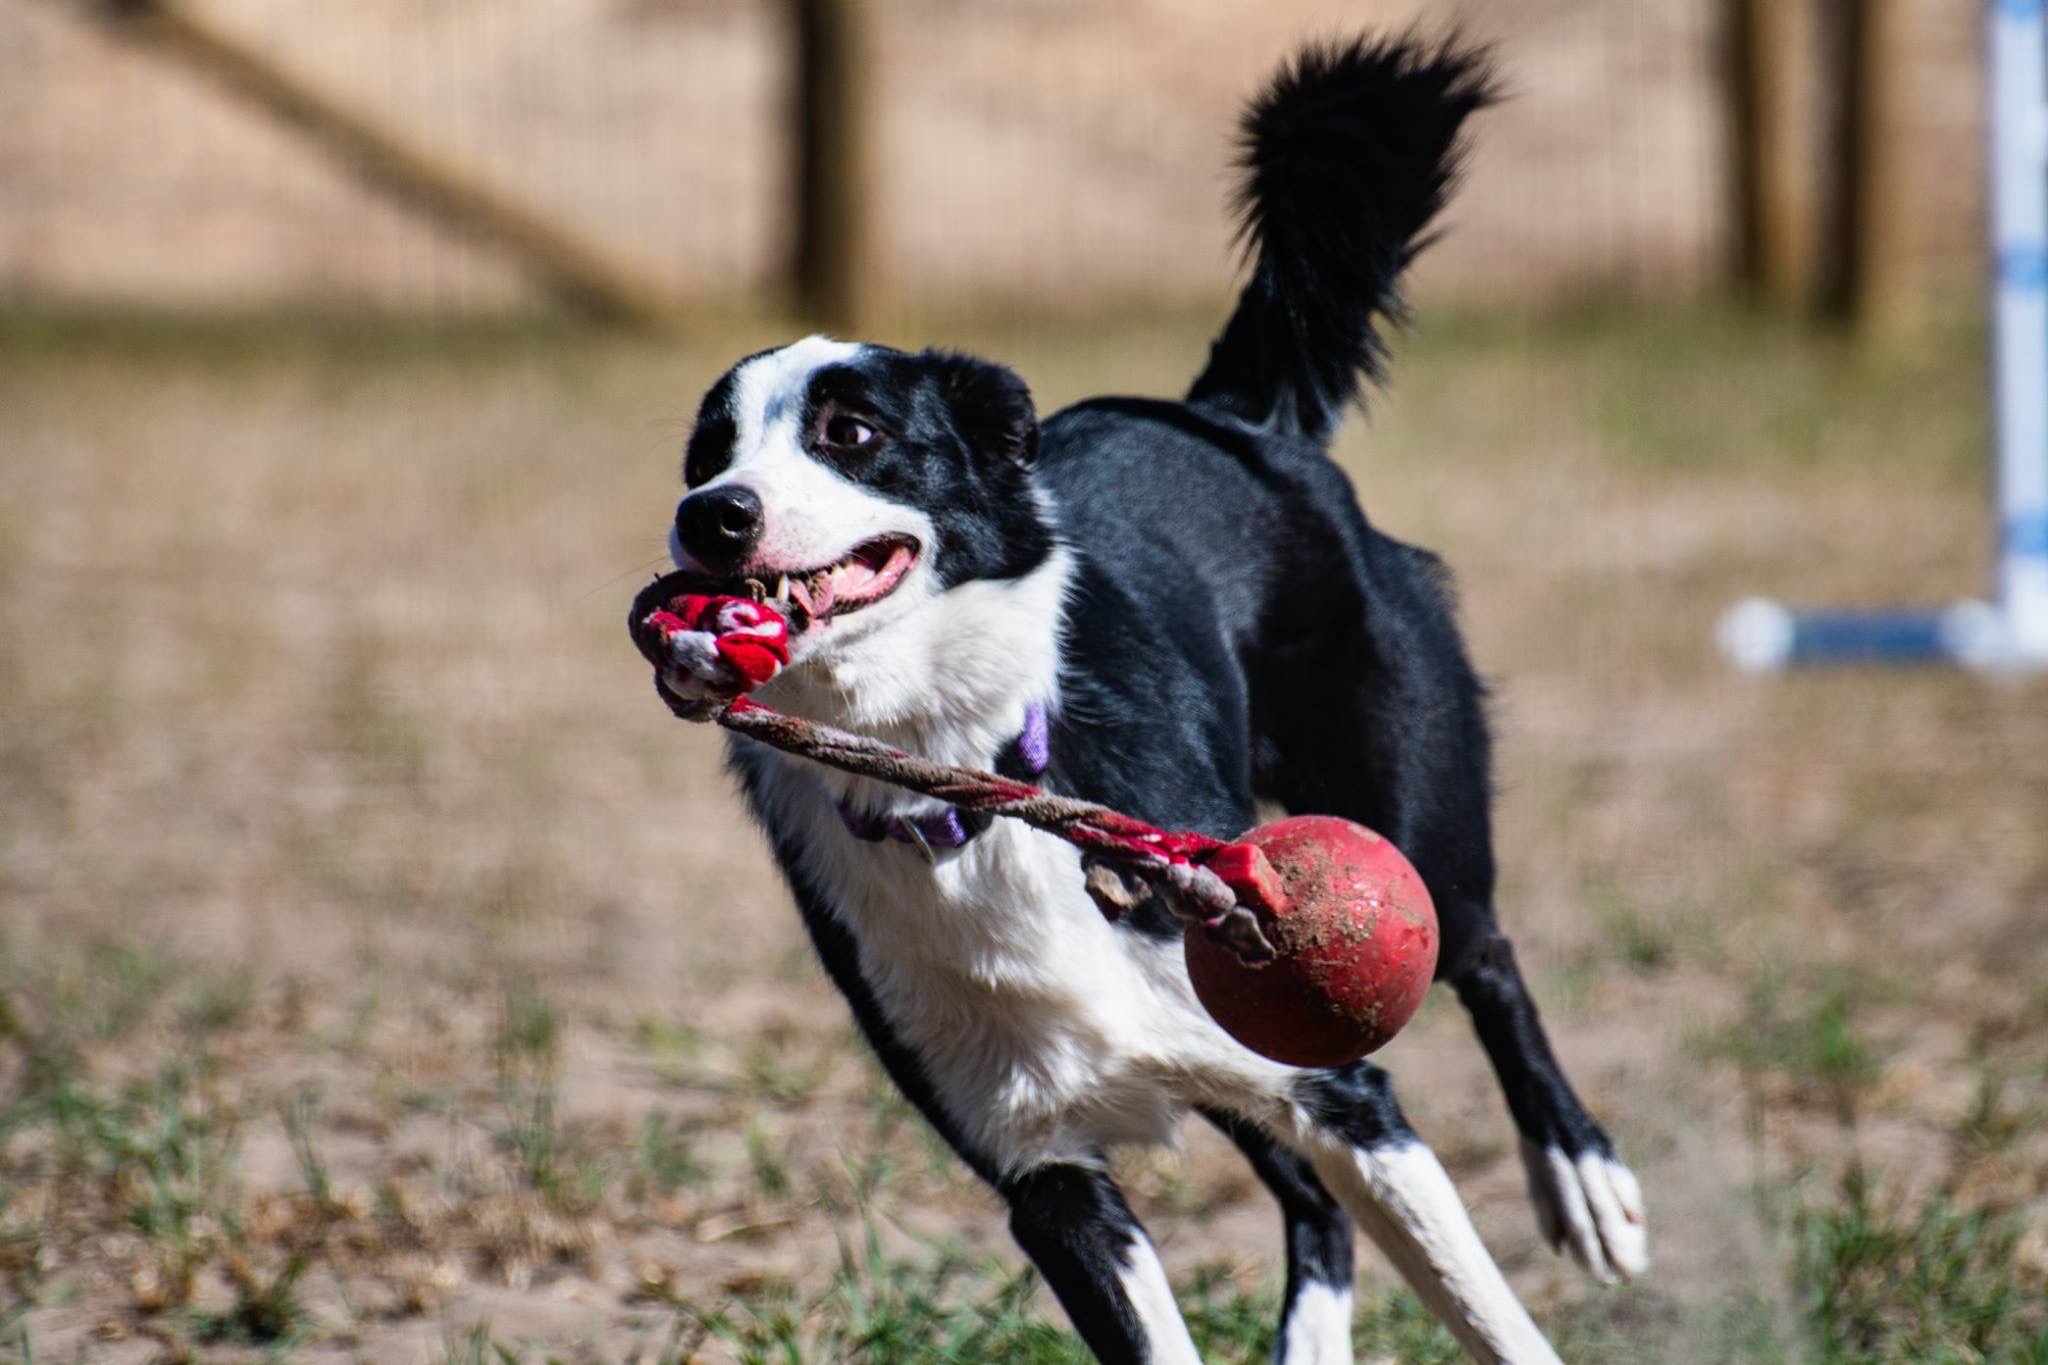 PHOTO: Squall, a Florida-born border collie, will compete in the Genius Dog Challenge on Wednesday, Nov. 18, 2020.